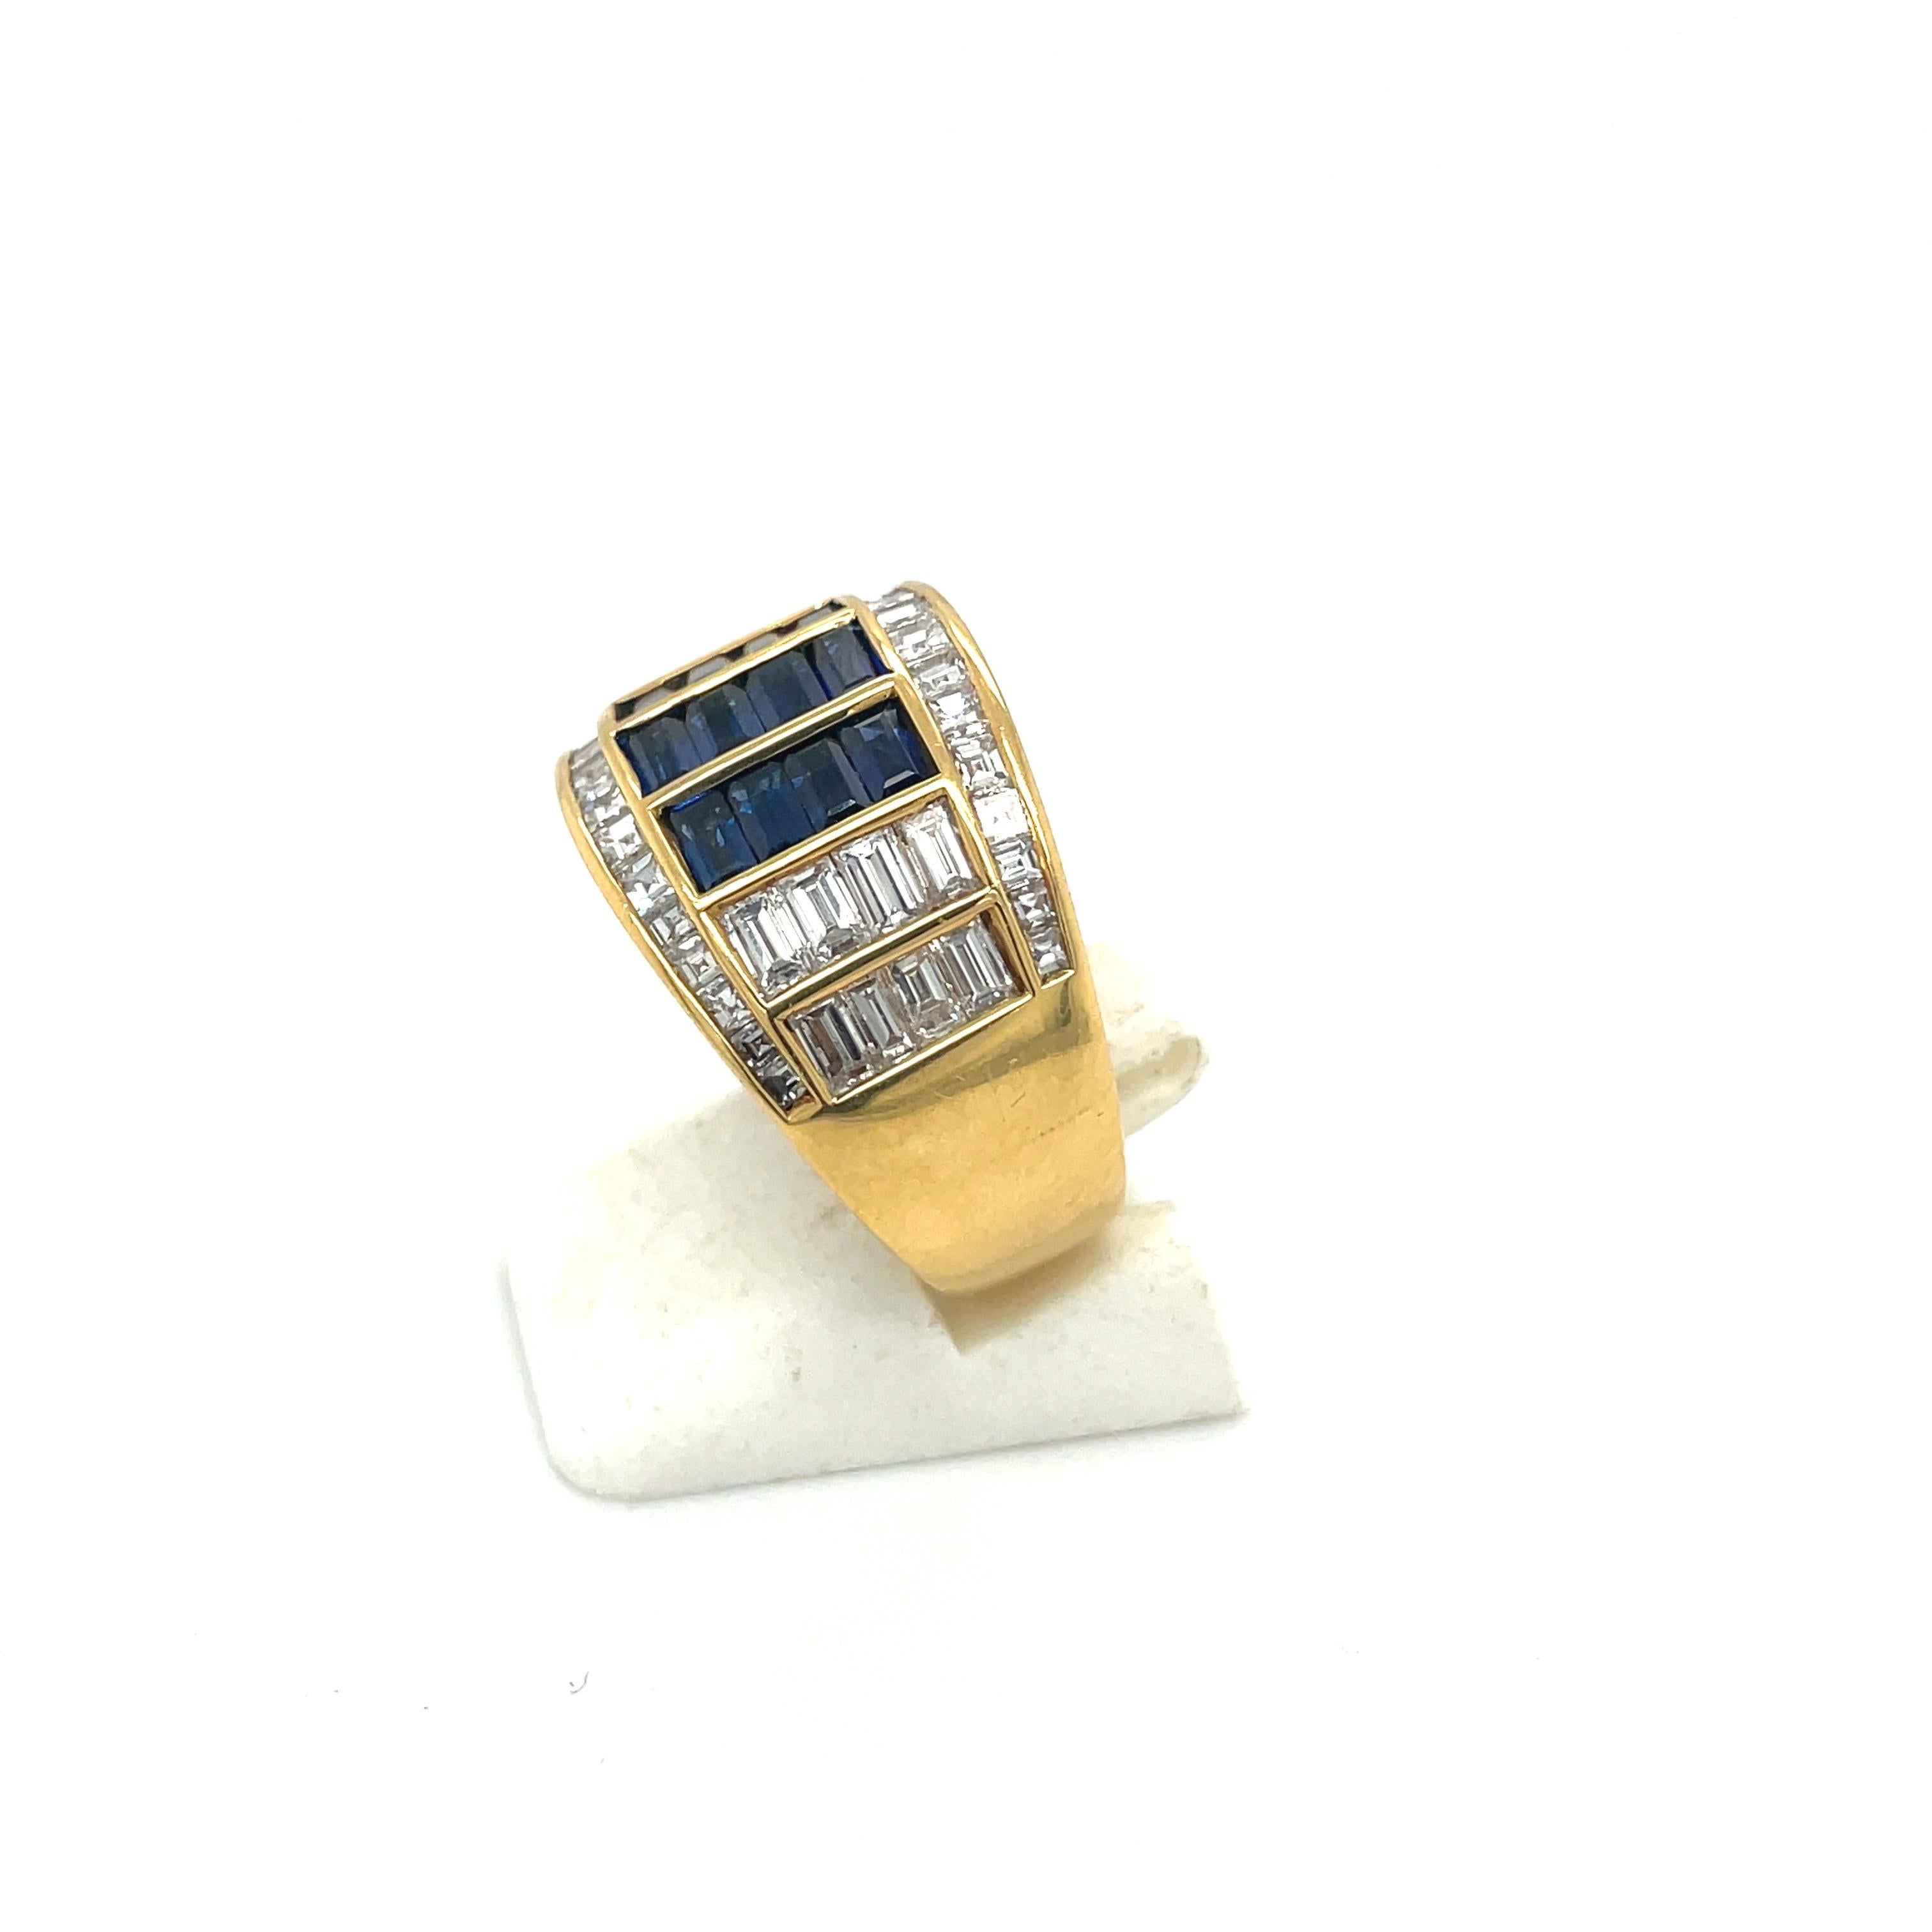 Designed by master craftsman Giuseppe Picchiotti . Cellini NYC presents this 18 karat yellow gold band ring beautifully set with baguette and square cut diamonds ,and baguette blue sapphires. The ring measures 13.5mm at the widest and tapers down to